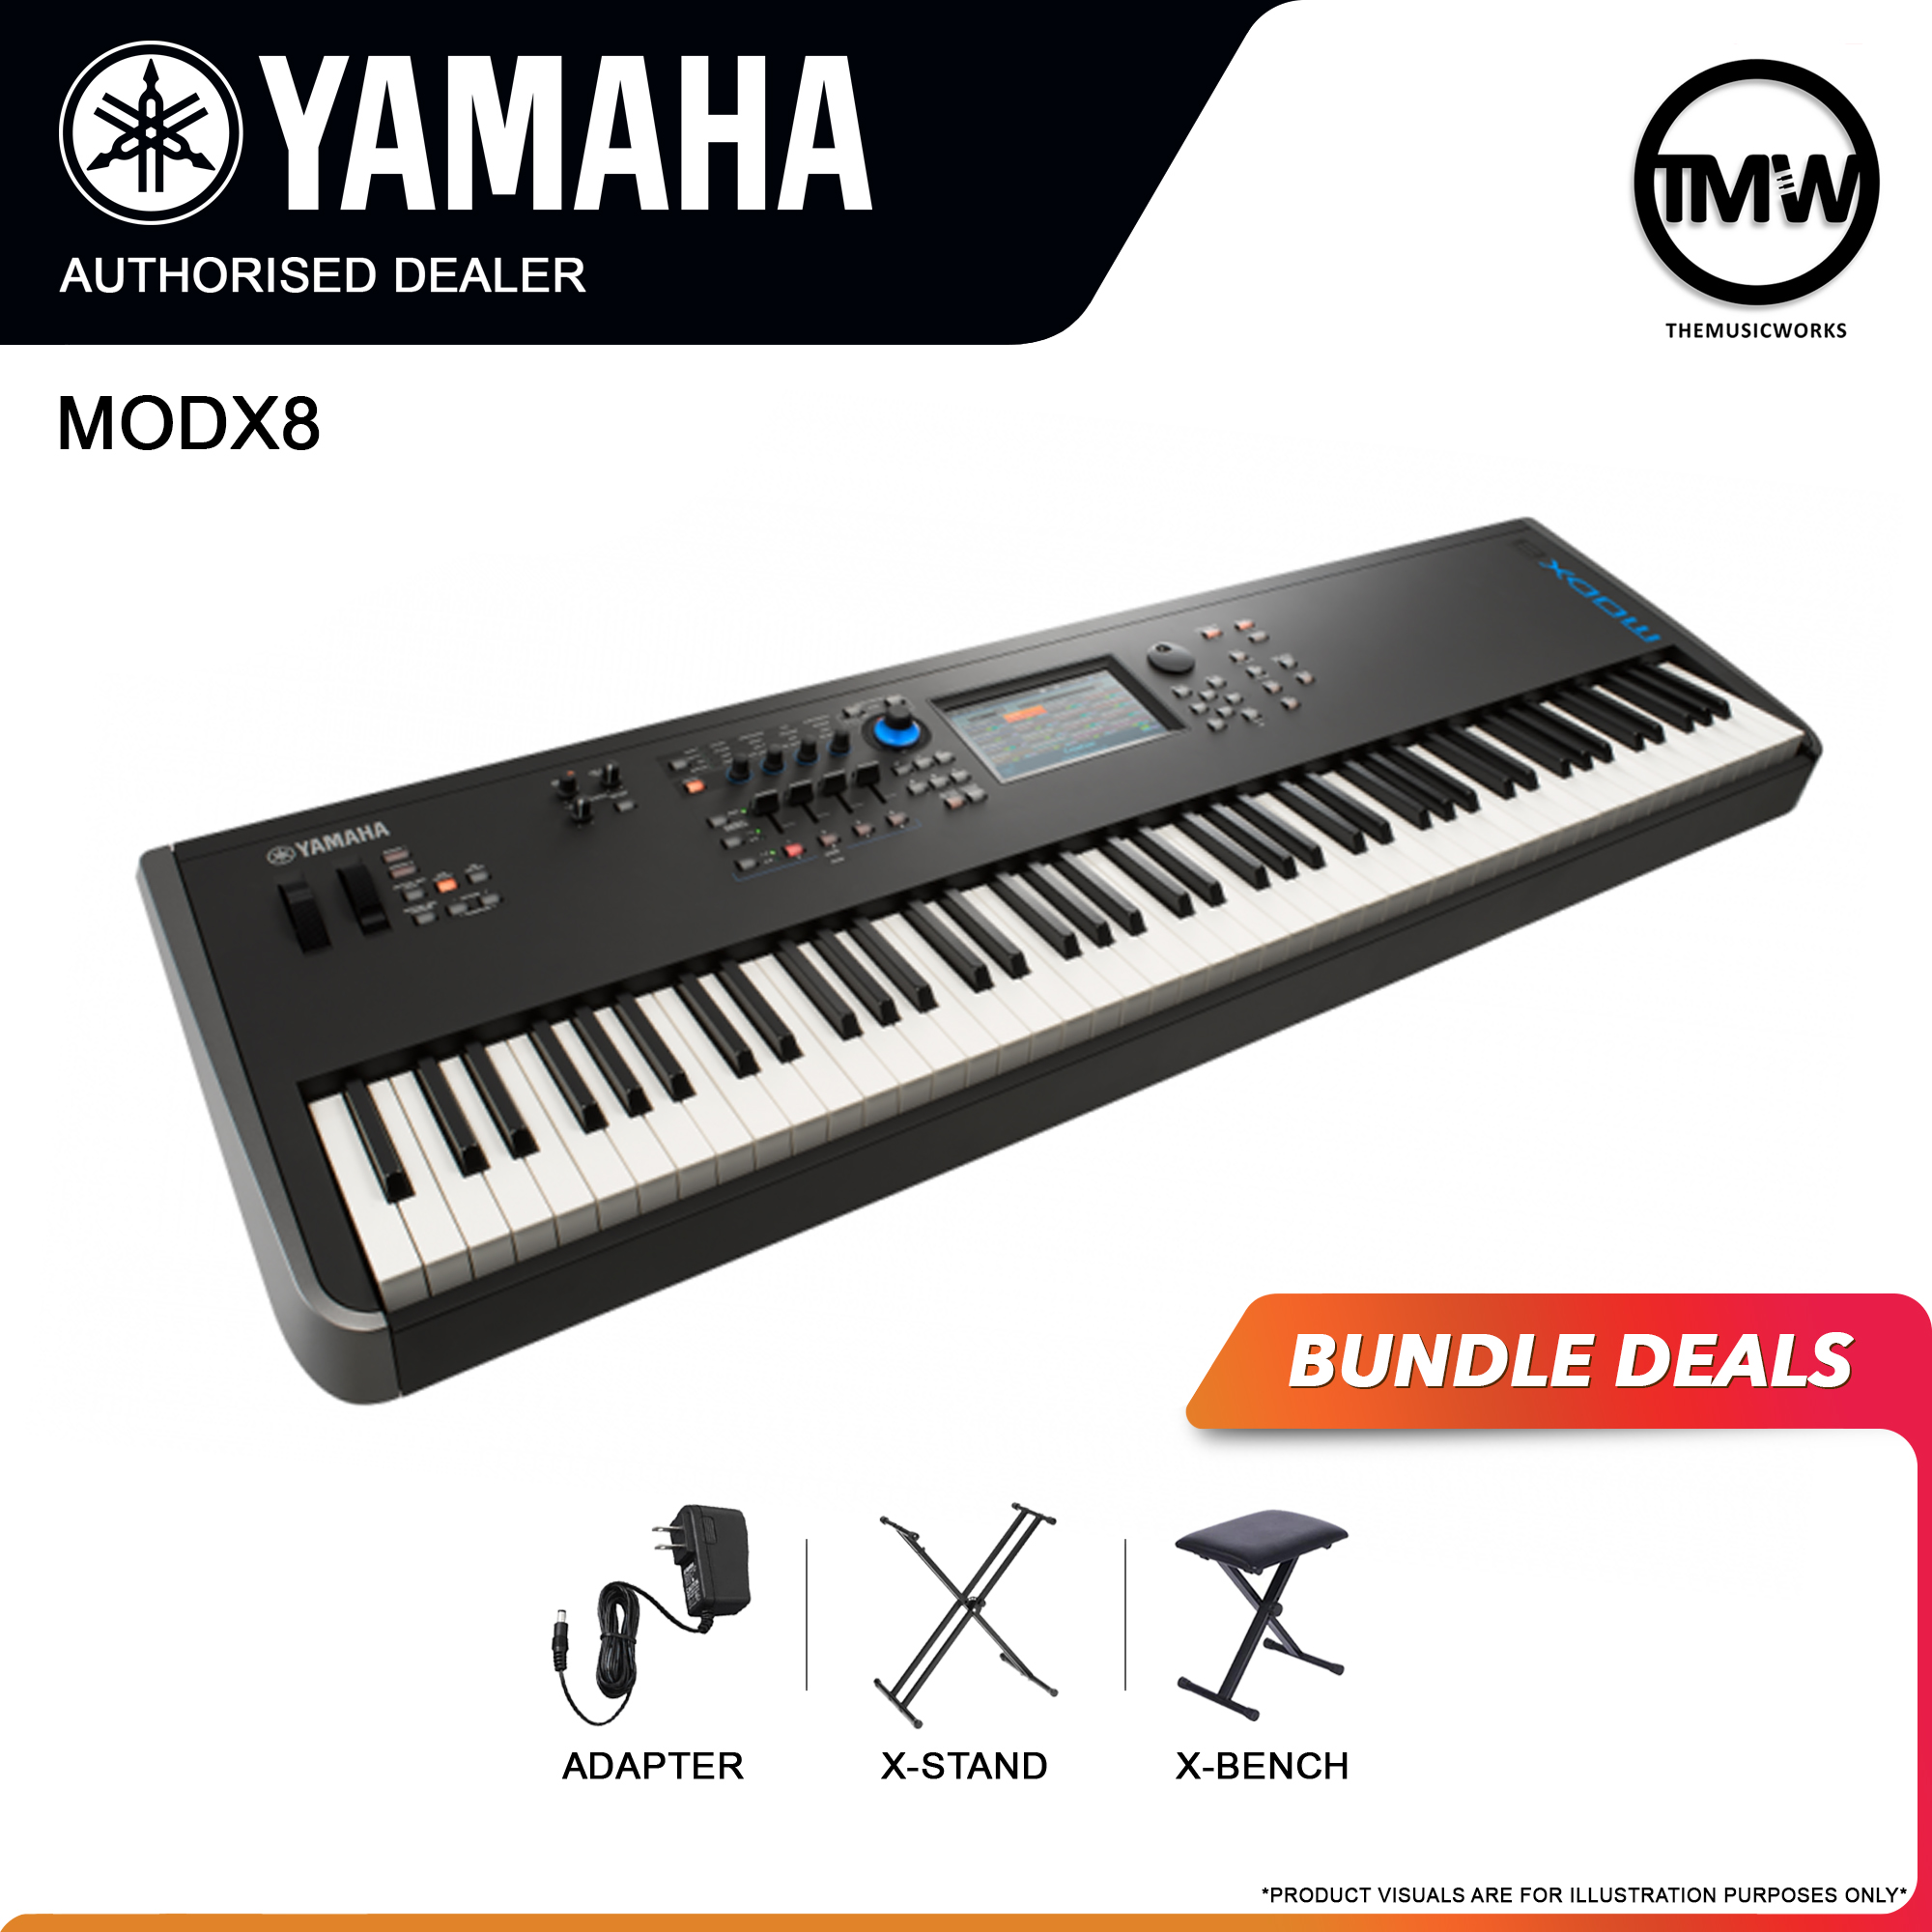 yamaha modx8 with adapter, x-stand, and x-bench